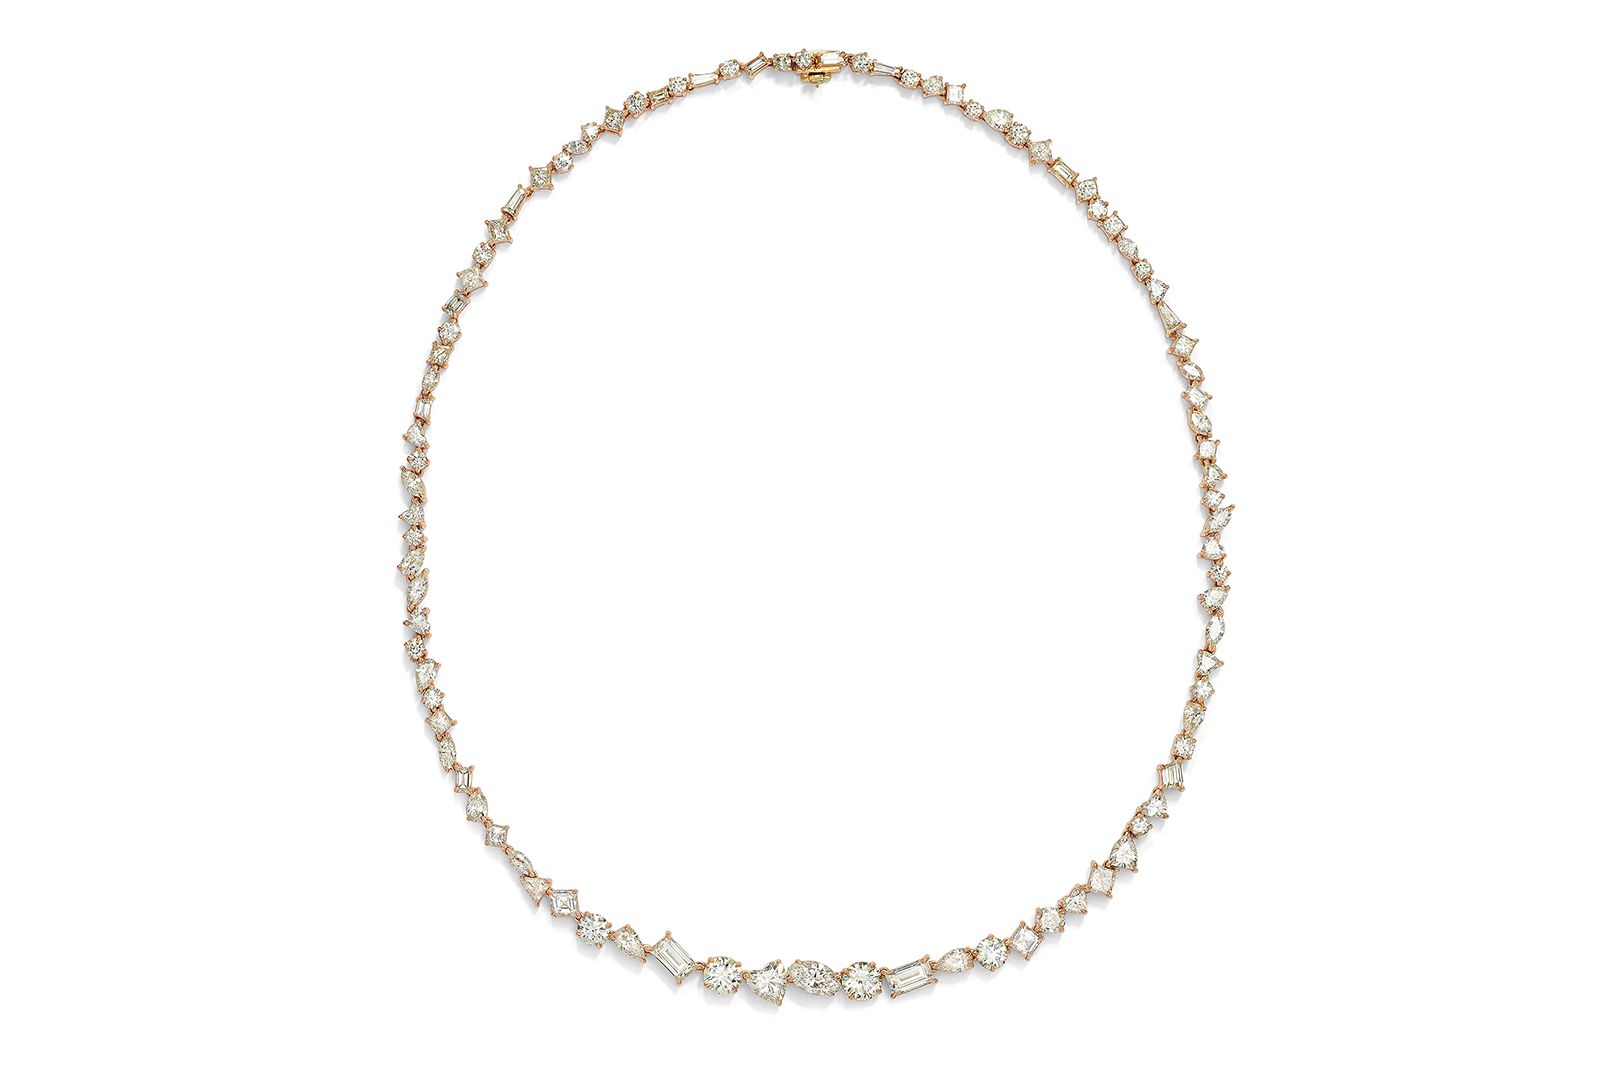 D. GREGORY Fantasia necklace with fancy-cut diamonds totalling 16.55 carats in 18k rose gold 